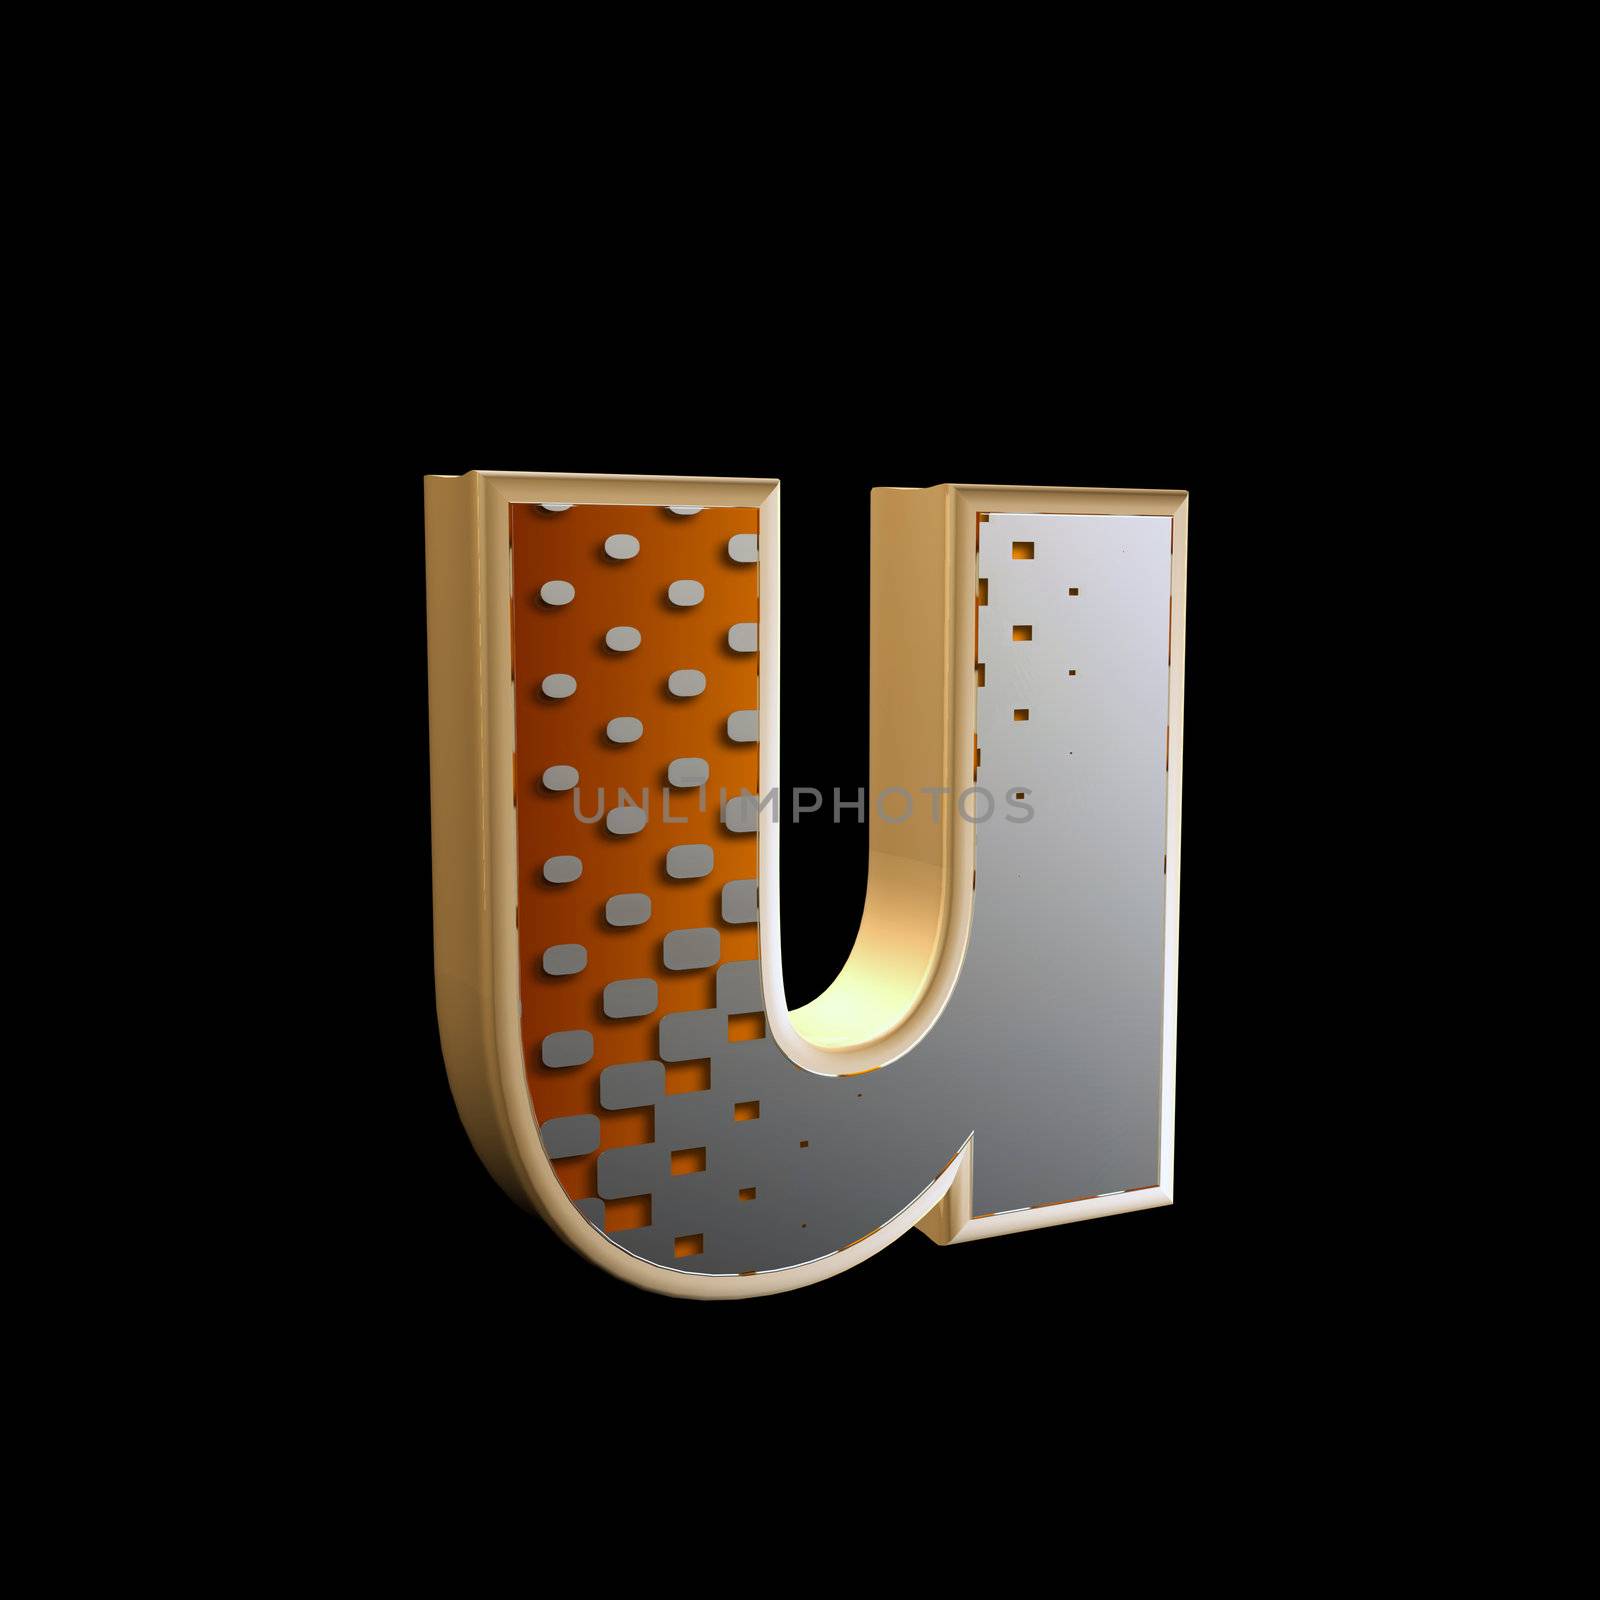 abstract 3d letter with halftone texture - u by chrisroll